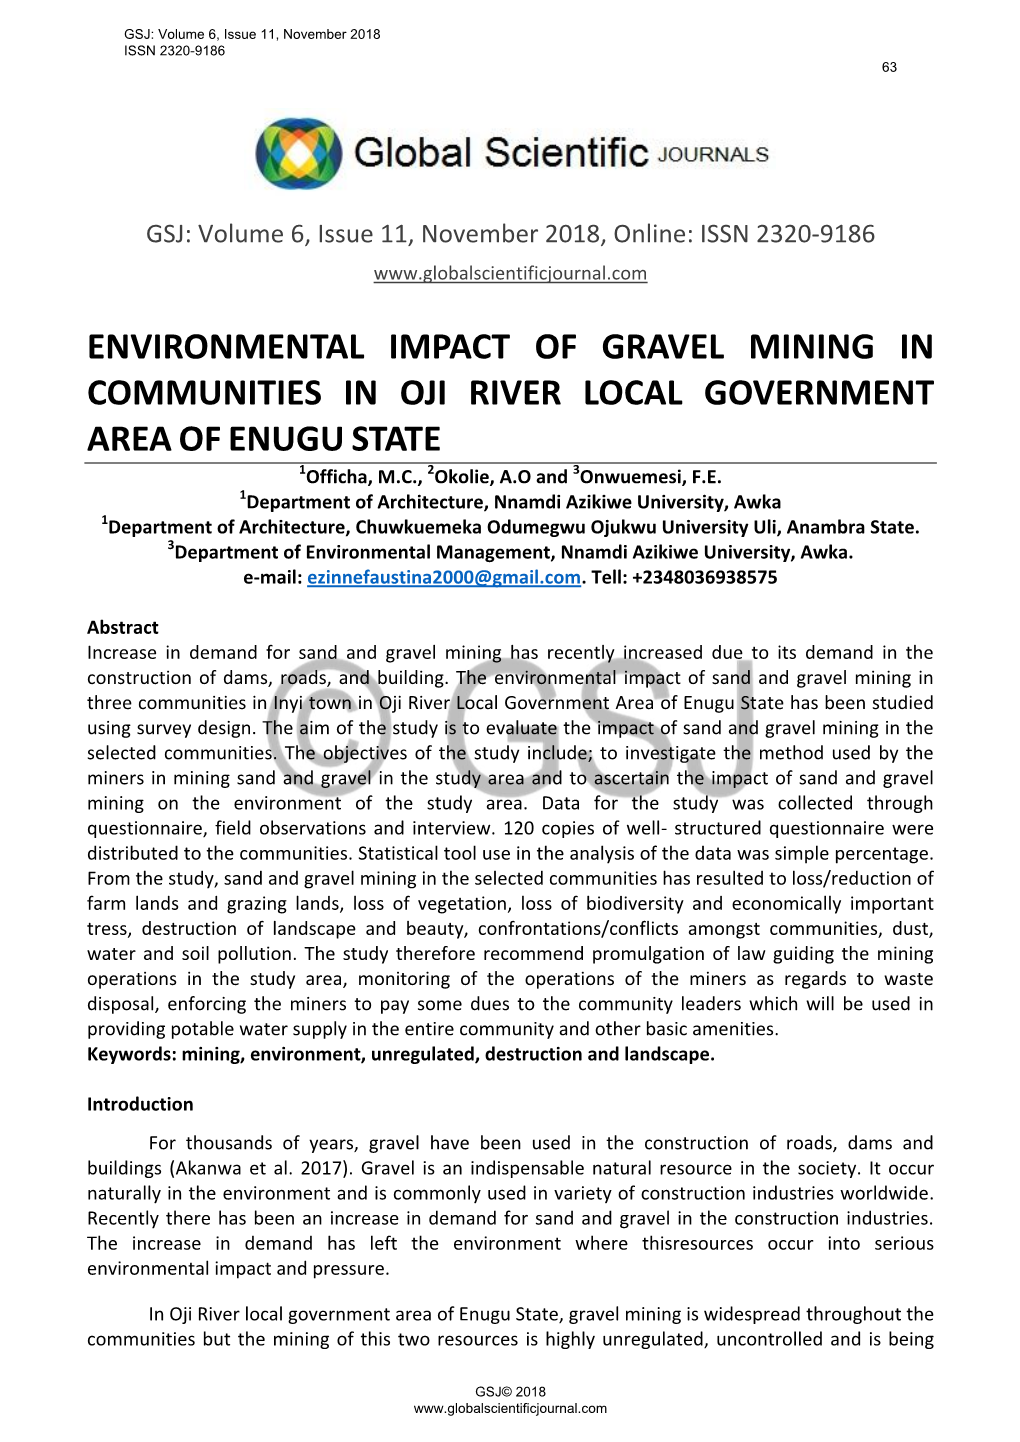 ENVIRONMENTAL IMPACT of GRAVEL MINING in COMMUNITIES in OJI RIVER LOCAL GOVERNMENT AREA of ENUGU STATE 1Officha, M.C., 2Okolie, A.O and 3Onwuemesi, F.E